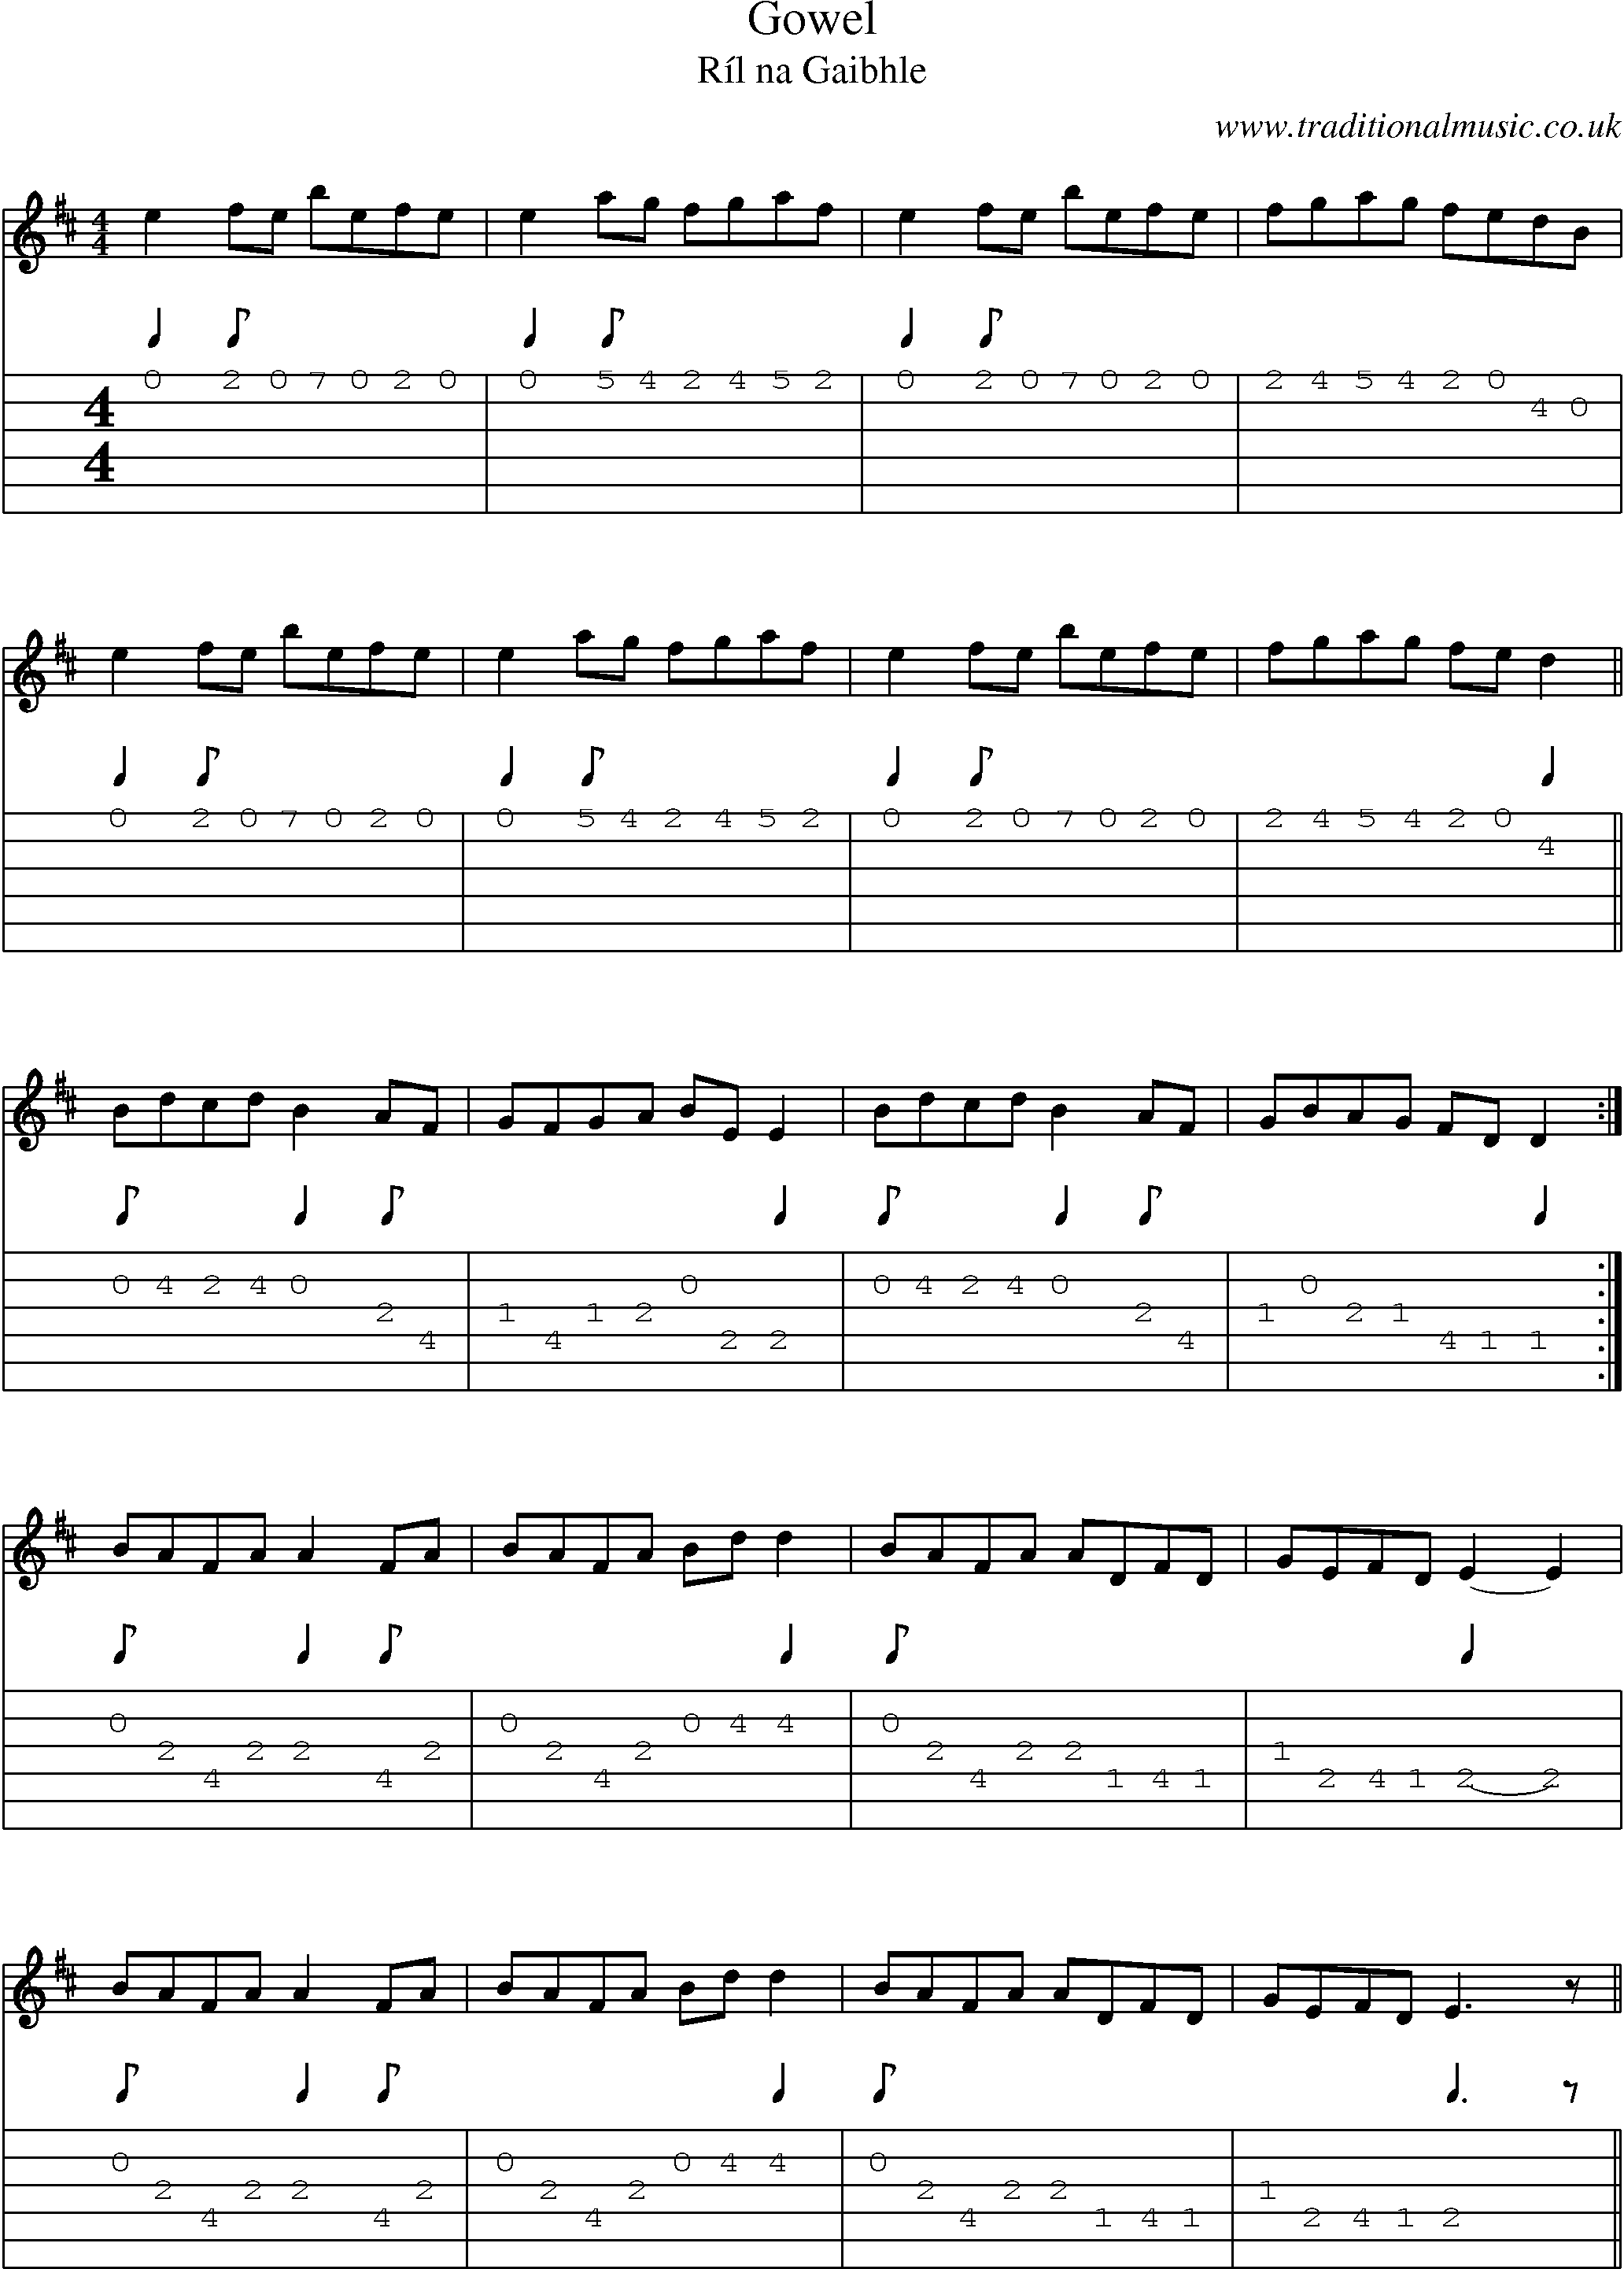 Music Score and Guitar Tabs for Gowel